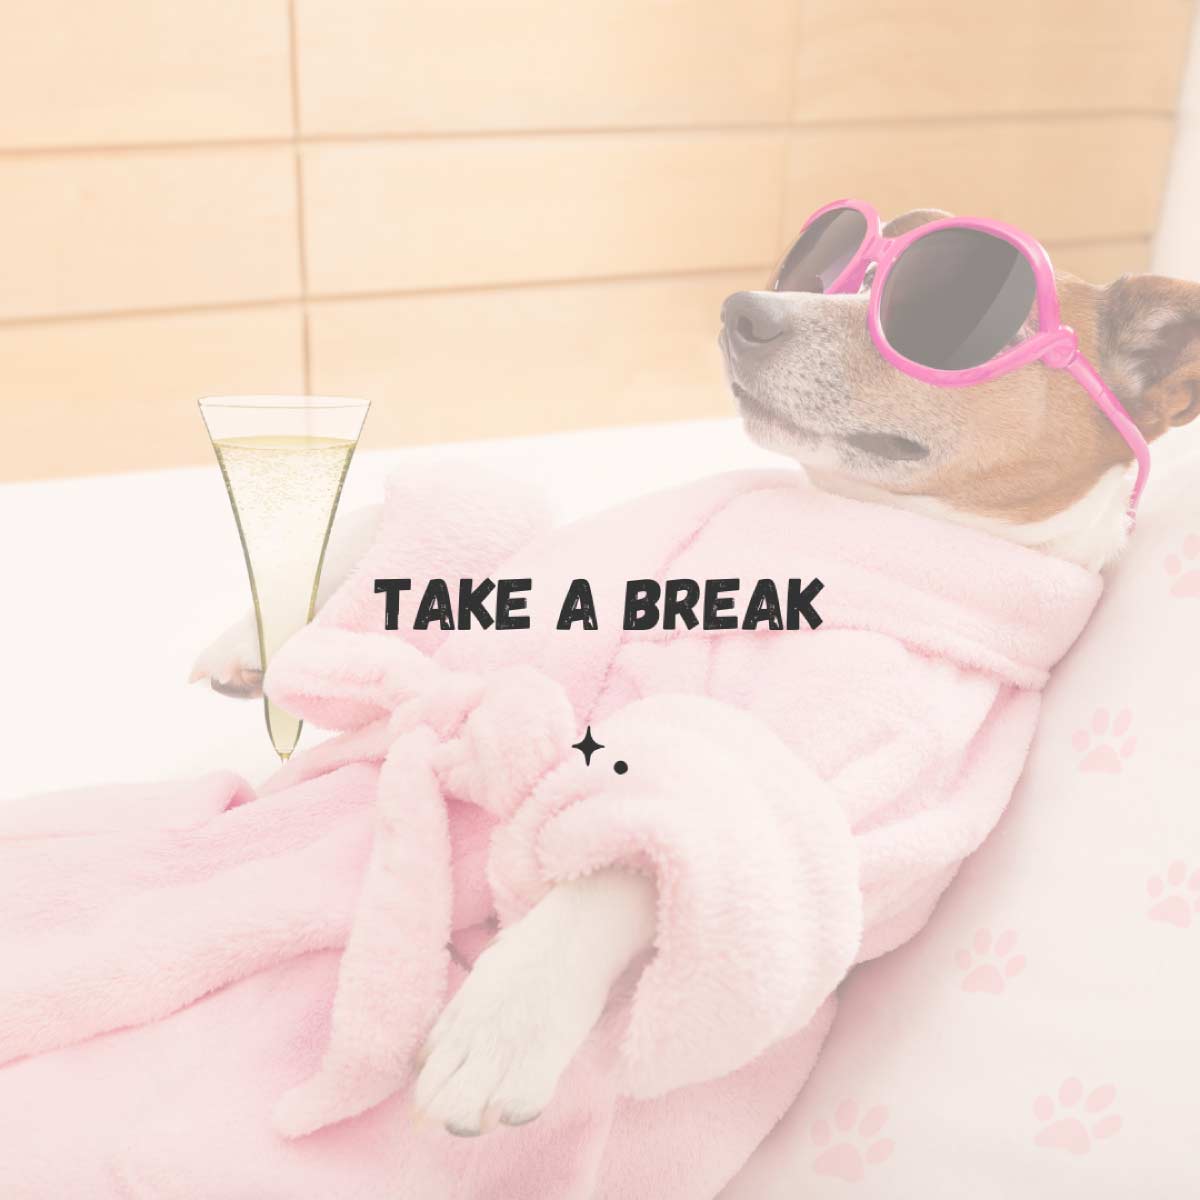 Take a break. A dog in a cozy bathrobe laying on their back with sunglasses on looking quite relaxed.